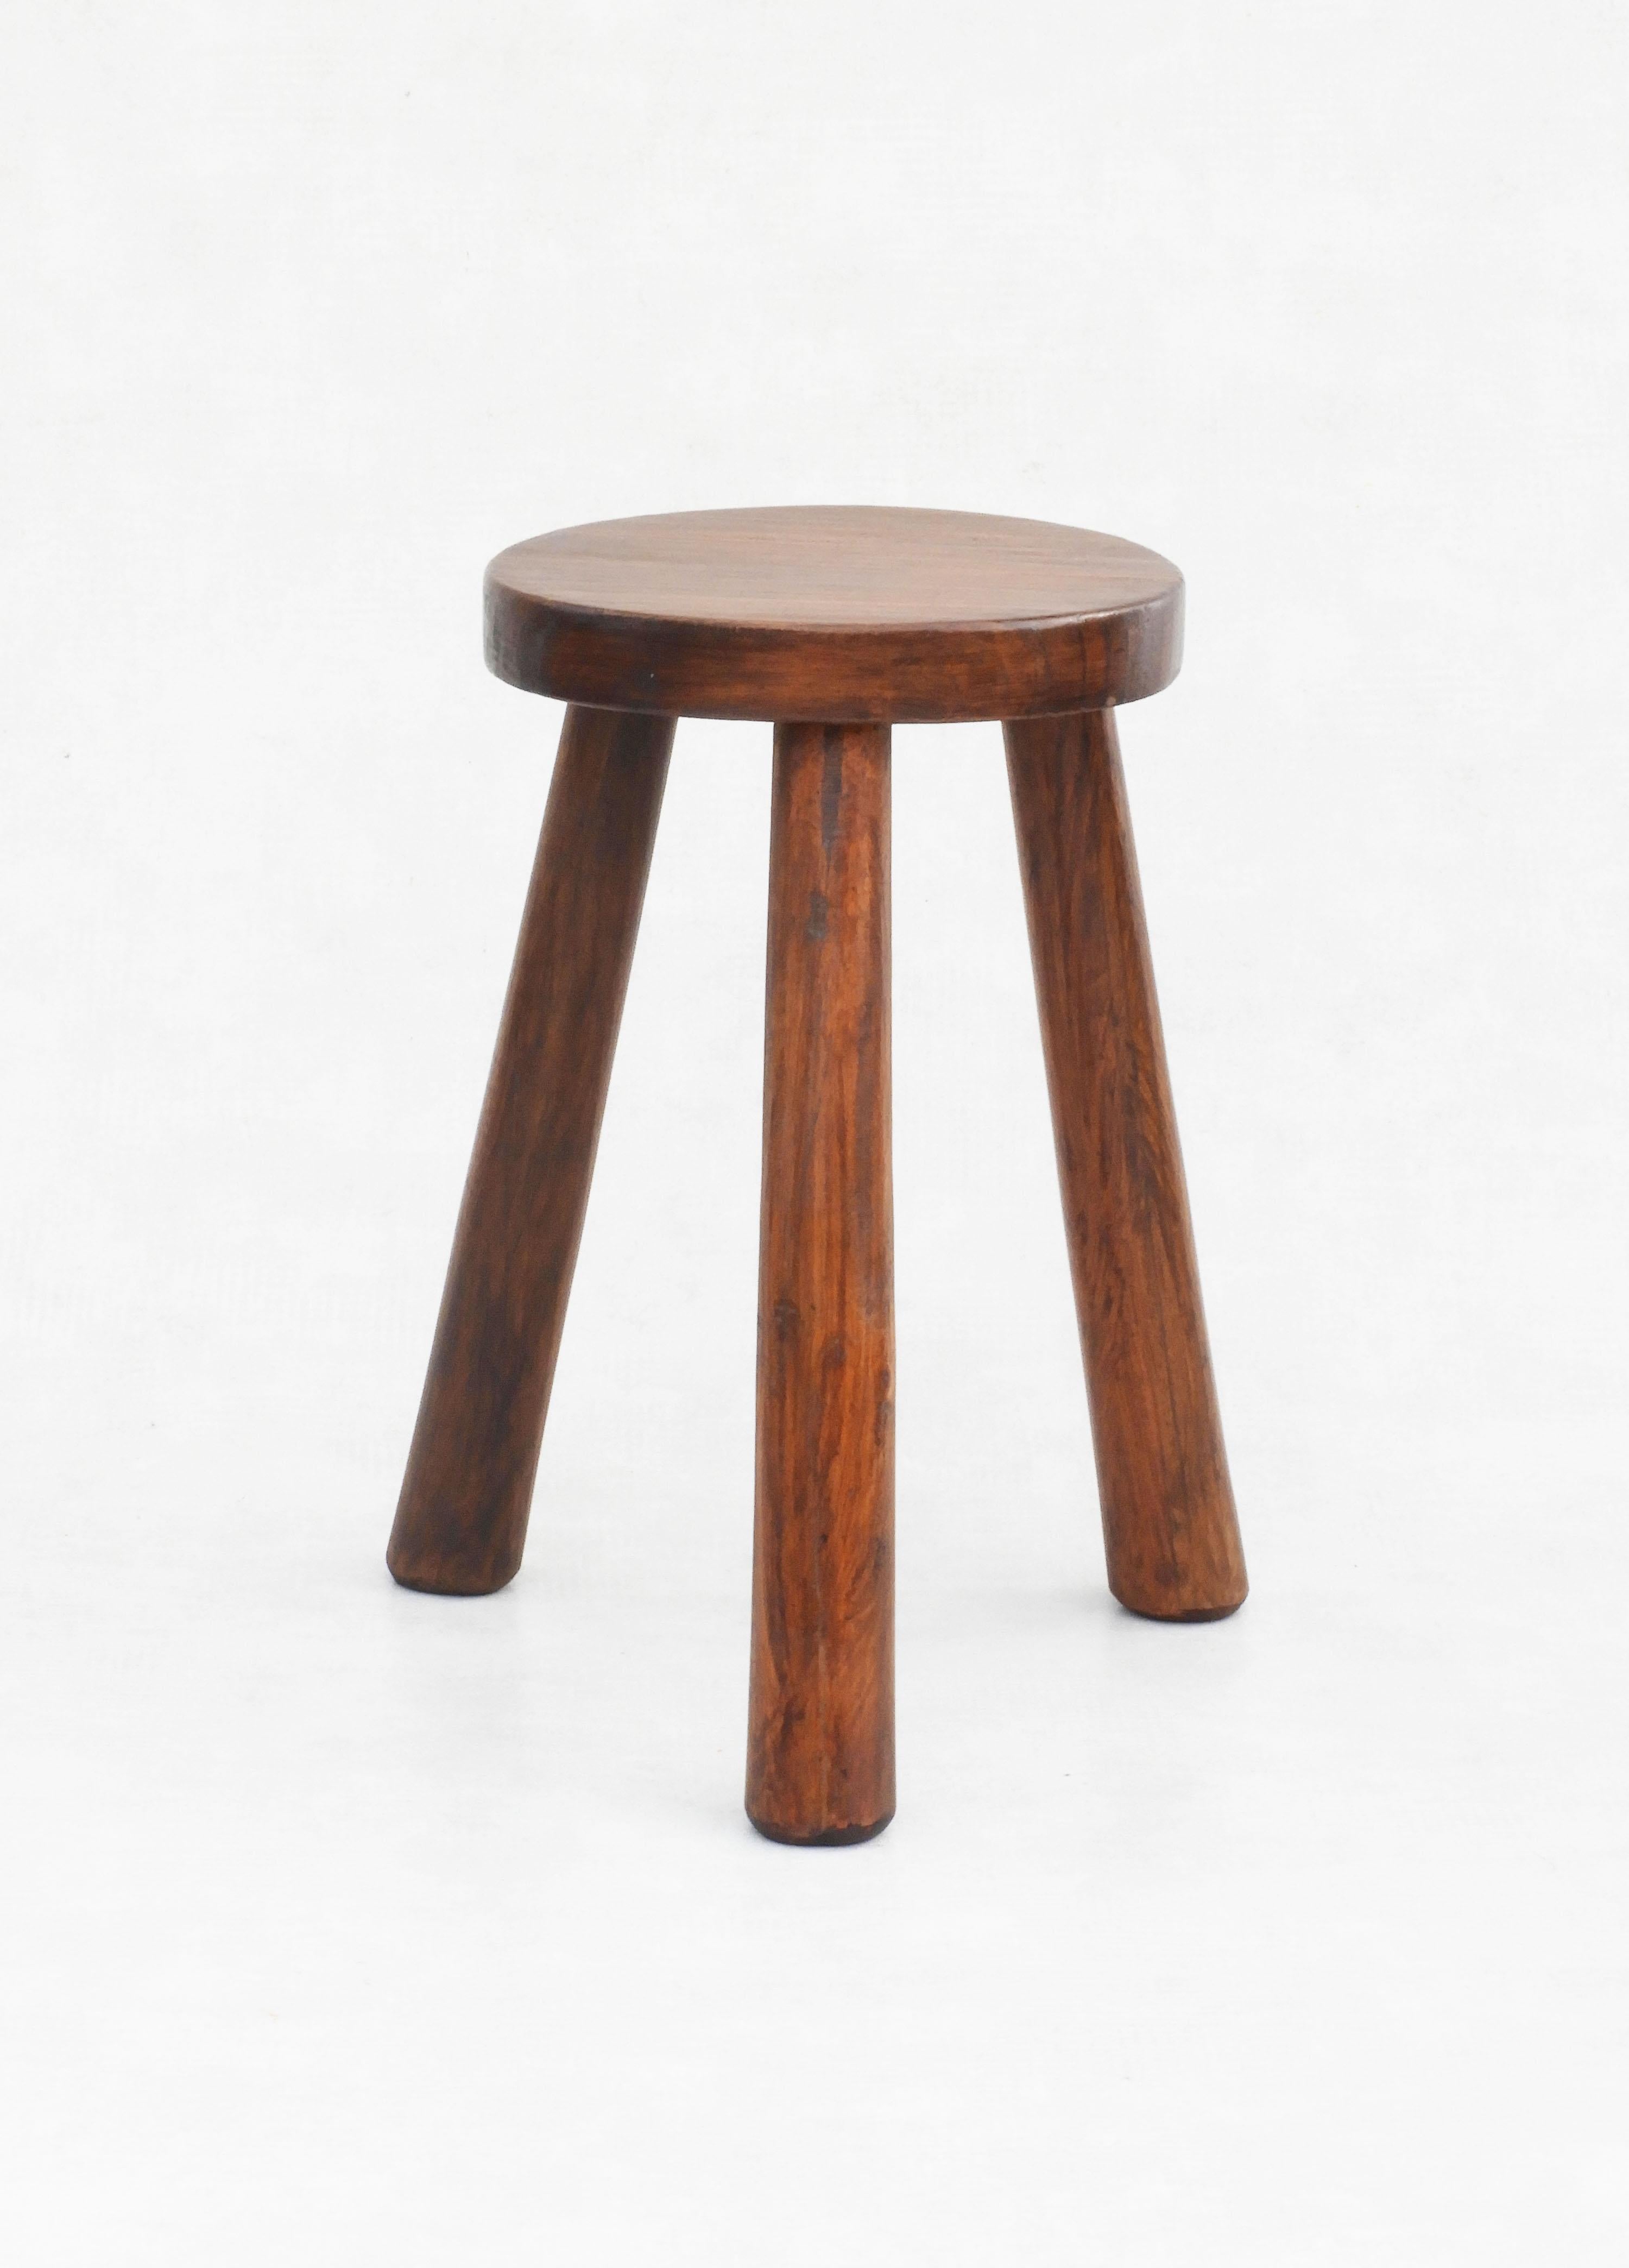 Fabulous wooden tripod stool from Mid-Century France in the style of Charlotte Perriand. 
Beautiful wood grain and texture, nice colour with good patina. 
In great vintage condition, all wood construction with no hardware and waxed